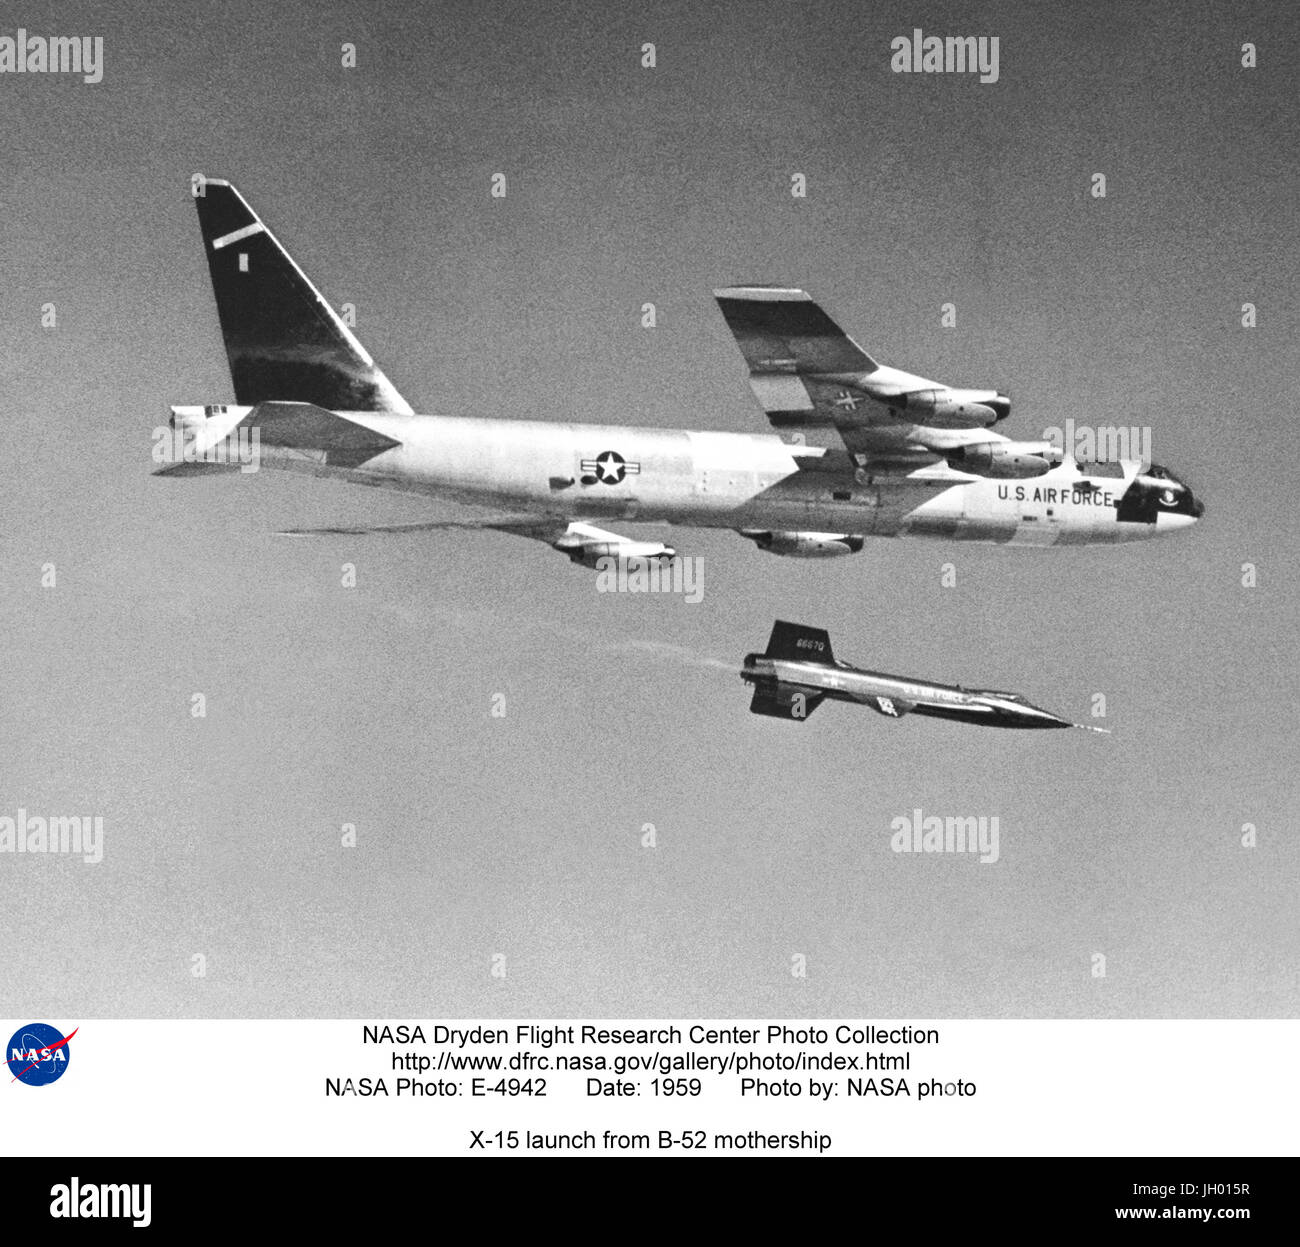 This photo illustrates how the X-15 rocket-powered aircraft was taken aloft under the wing of a B-52. Because of the large fuel consumption, the X-15 was air launched from a B-52 aircraft at 45,000 ft and a speed of about 500 mph. This was one of the early powered flights using a pair of XLR-11 engines (until the XLR-99 became available). Stock Photo